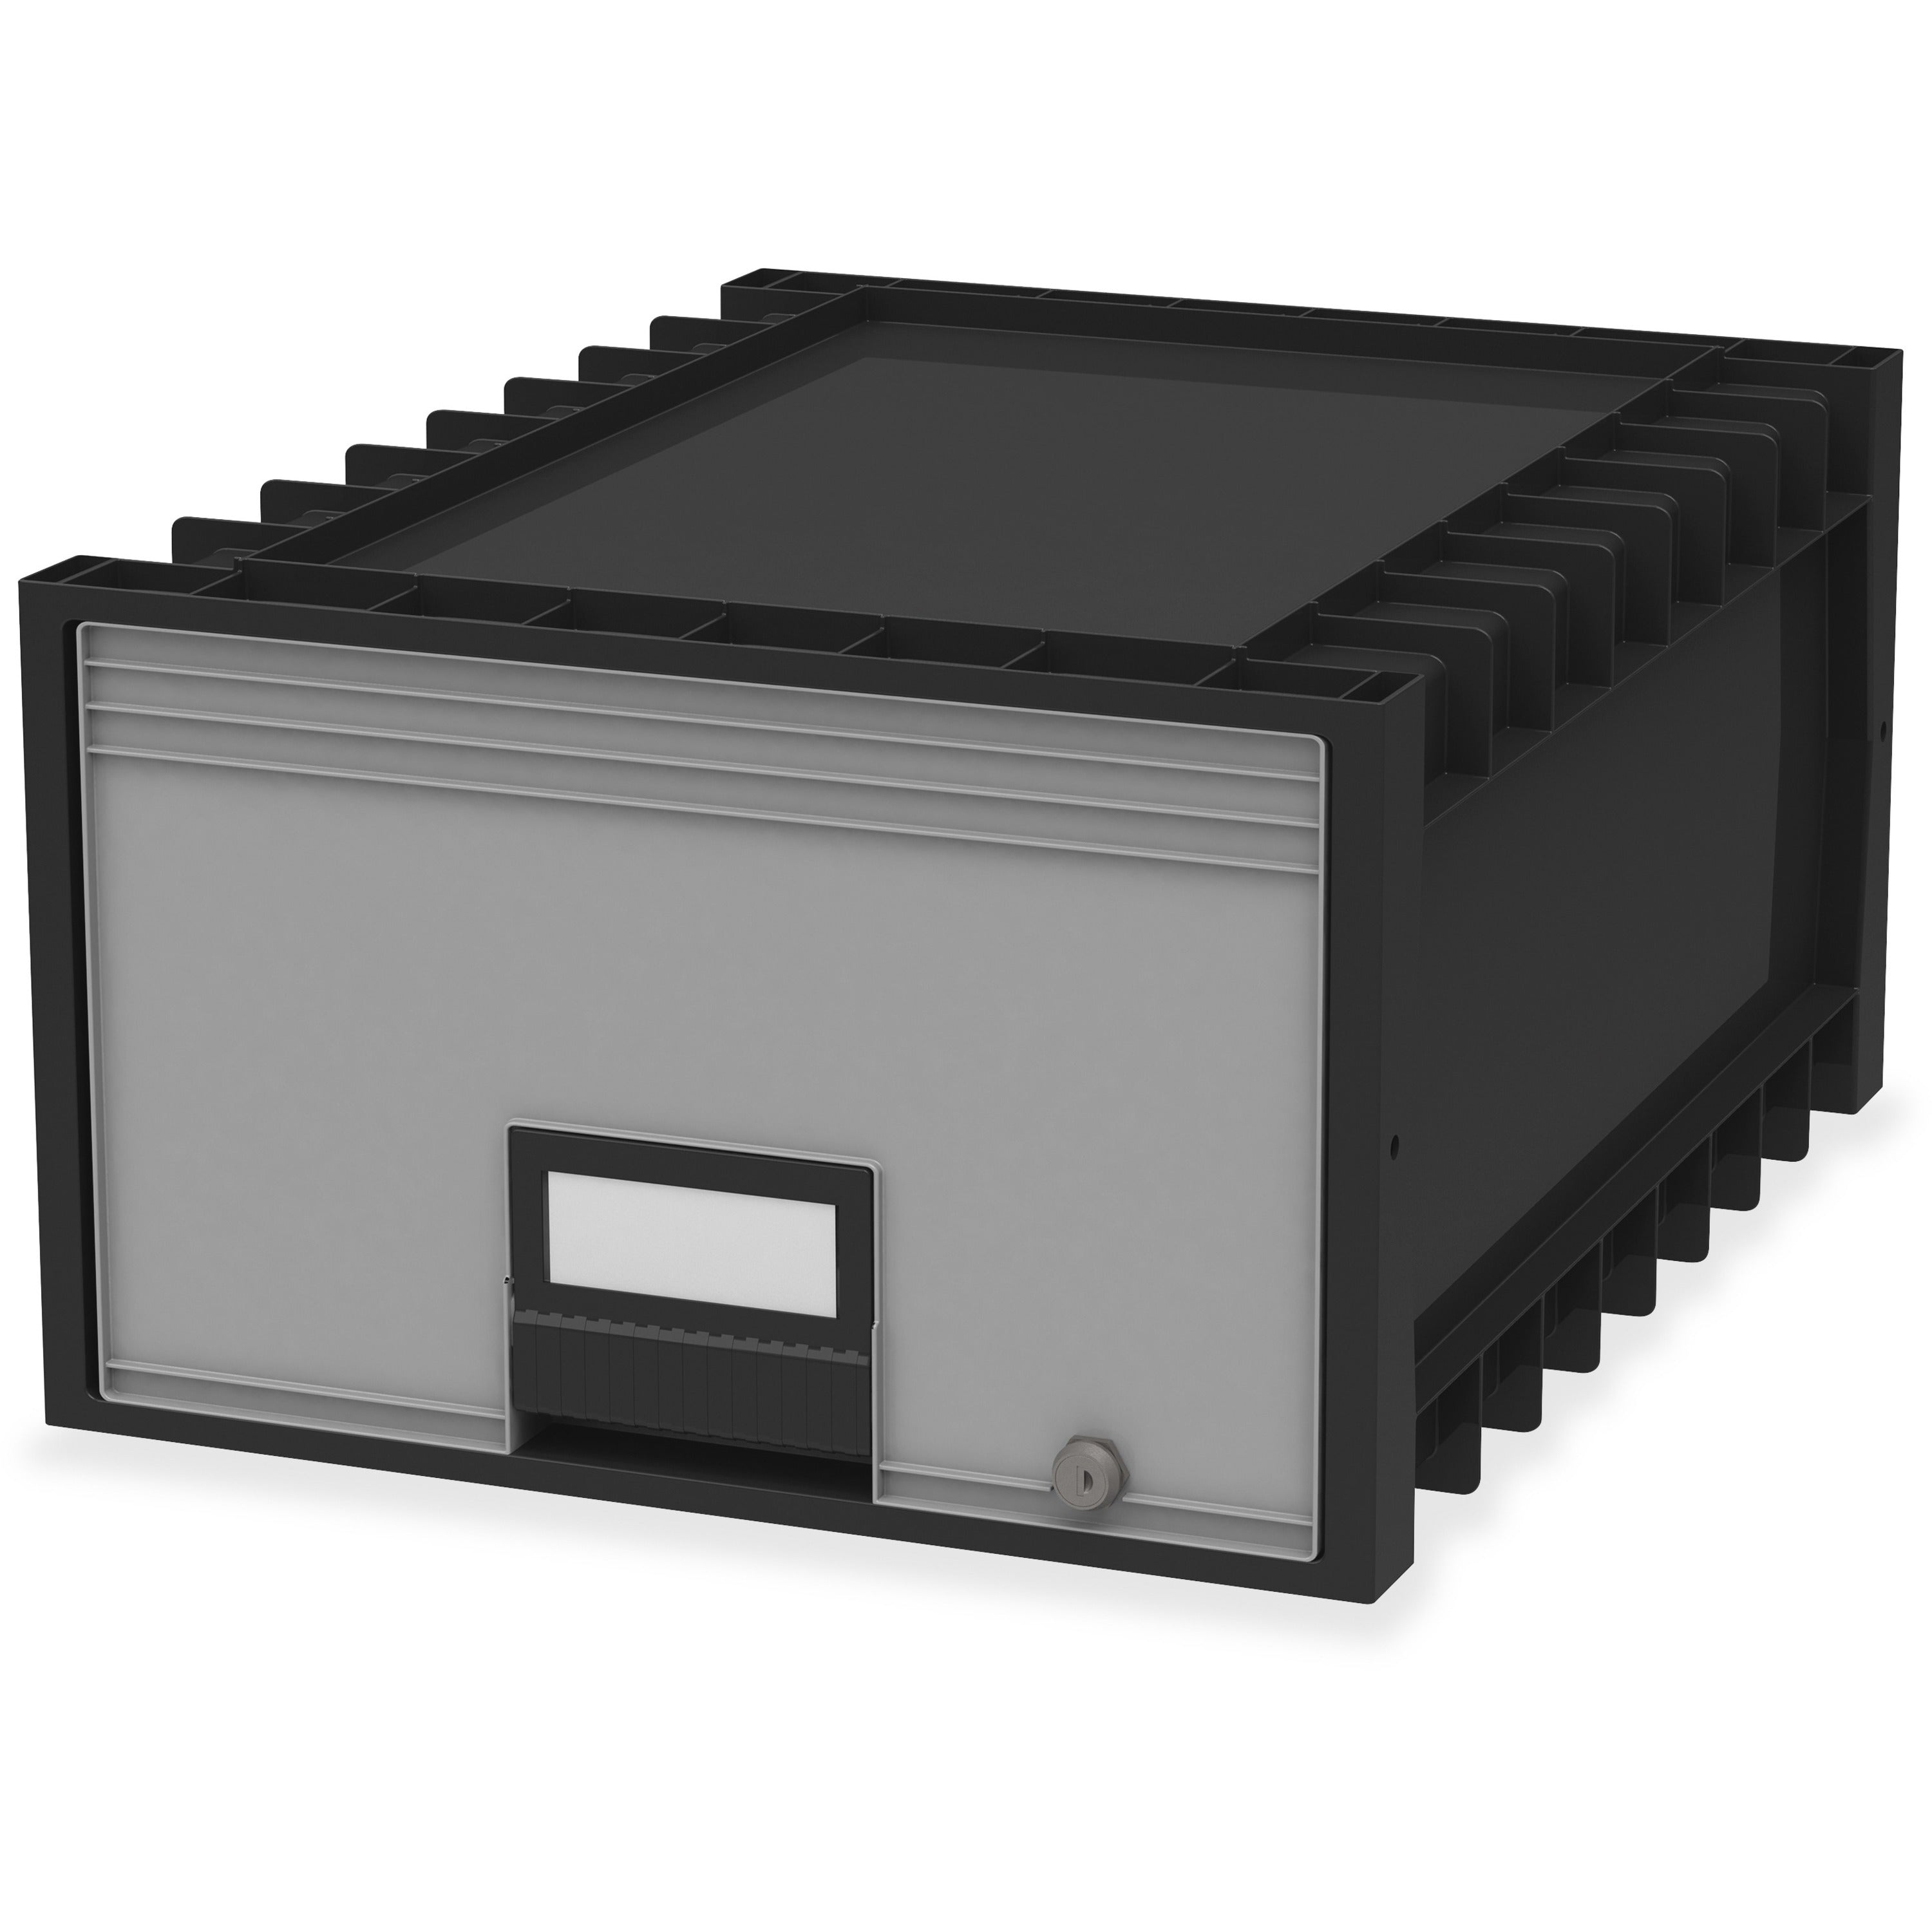 storex-archive-storage-box-external-dimensions-183-length-x-115-width-x-244-height-heavy-duty-stackable-black-gray-for-storage-recycled-1-each_stx61402u01c - 1